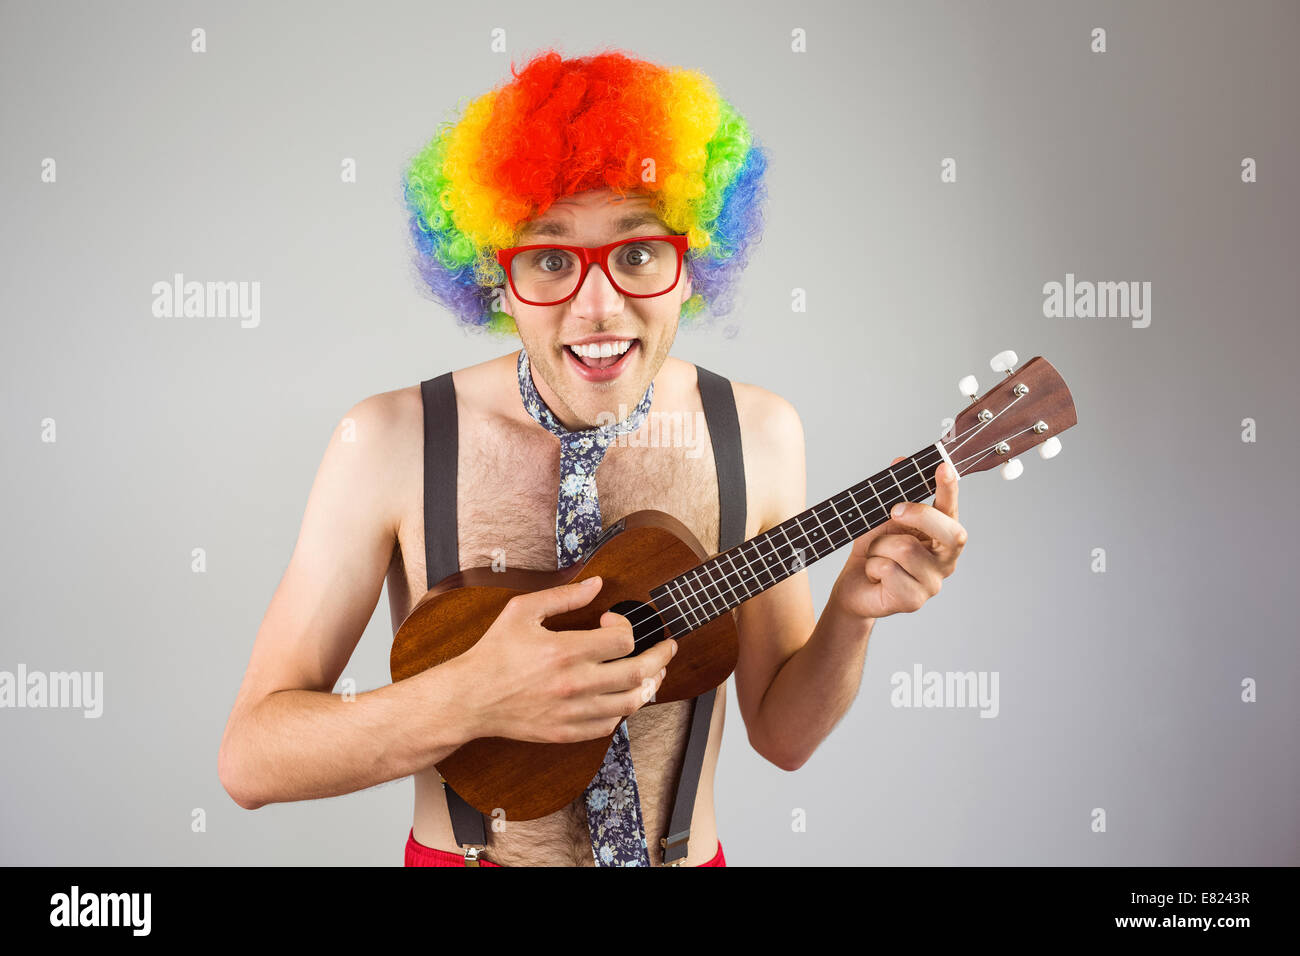 Geeky hipster afro parrucca arcobaleno a suonare la chitarra Foto Stock